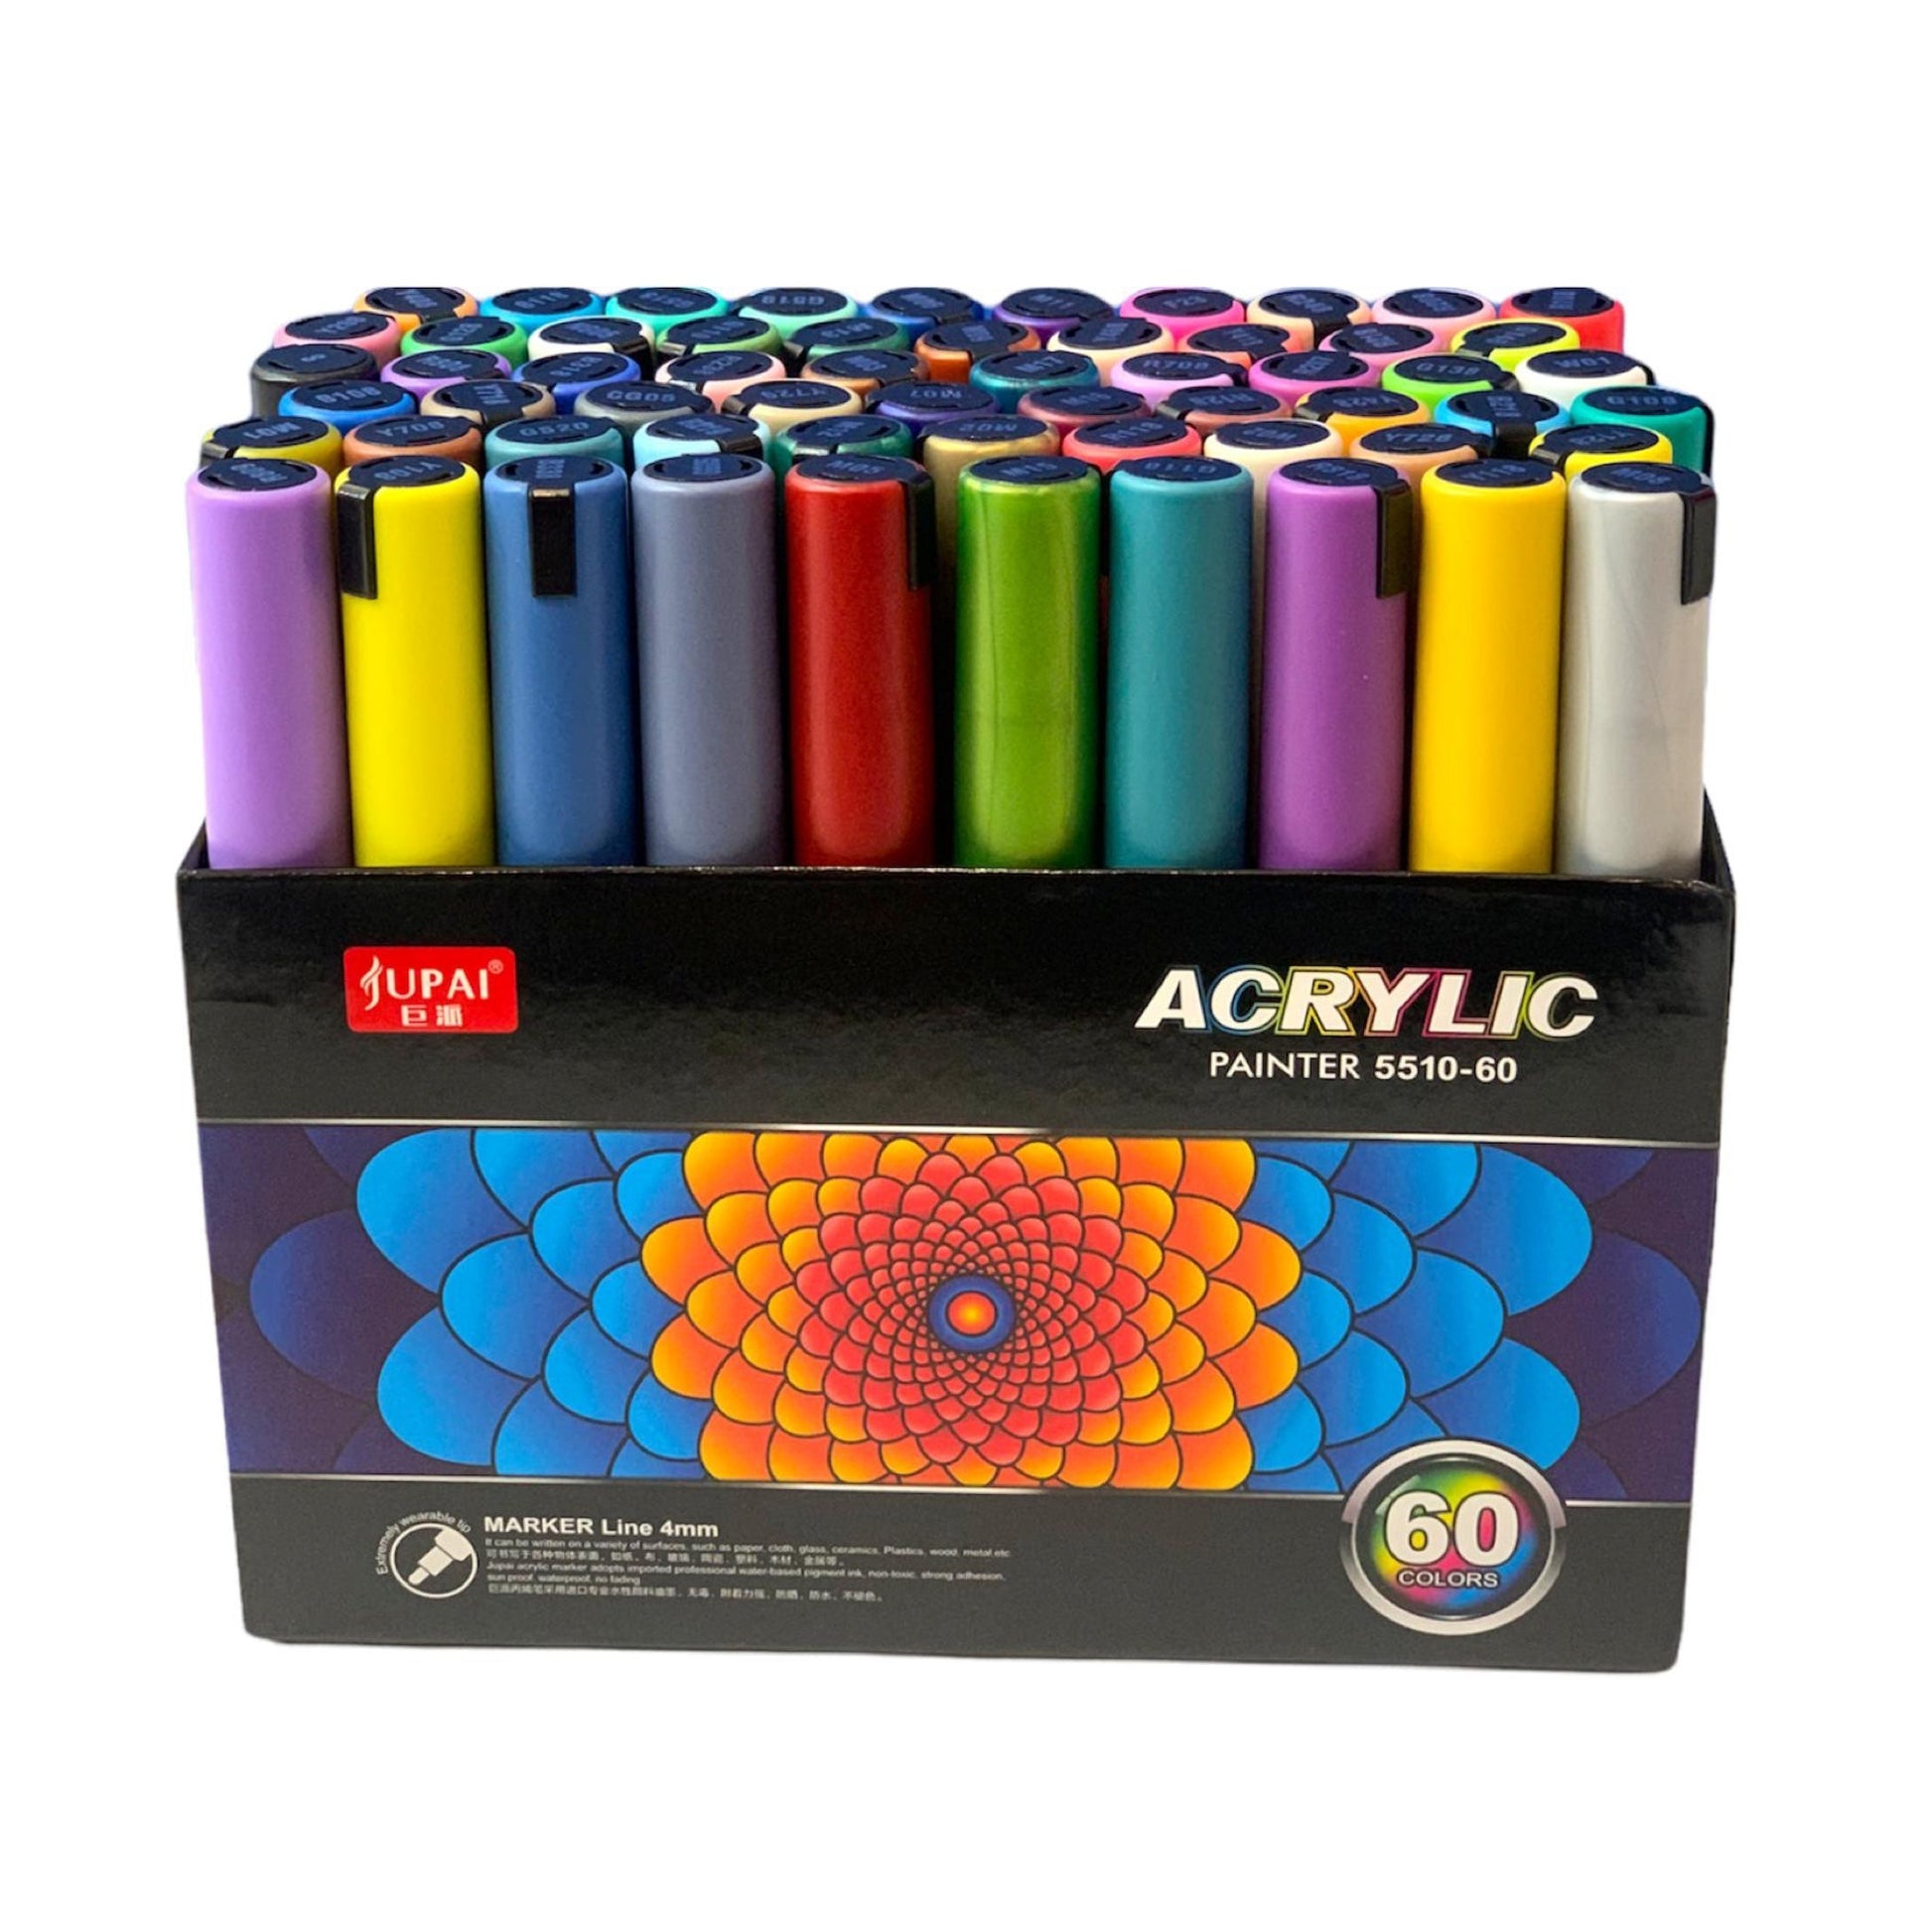 Acrylic Marker Line 4mm 60 color ||  اقلام اكريلك ماركر 4مم 60 لون⁩